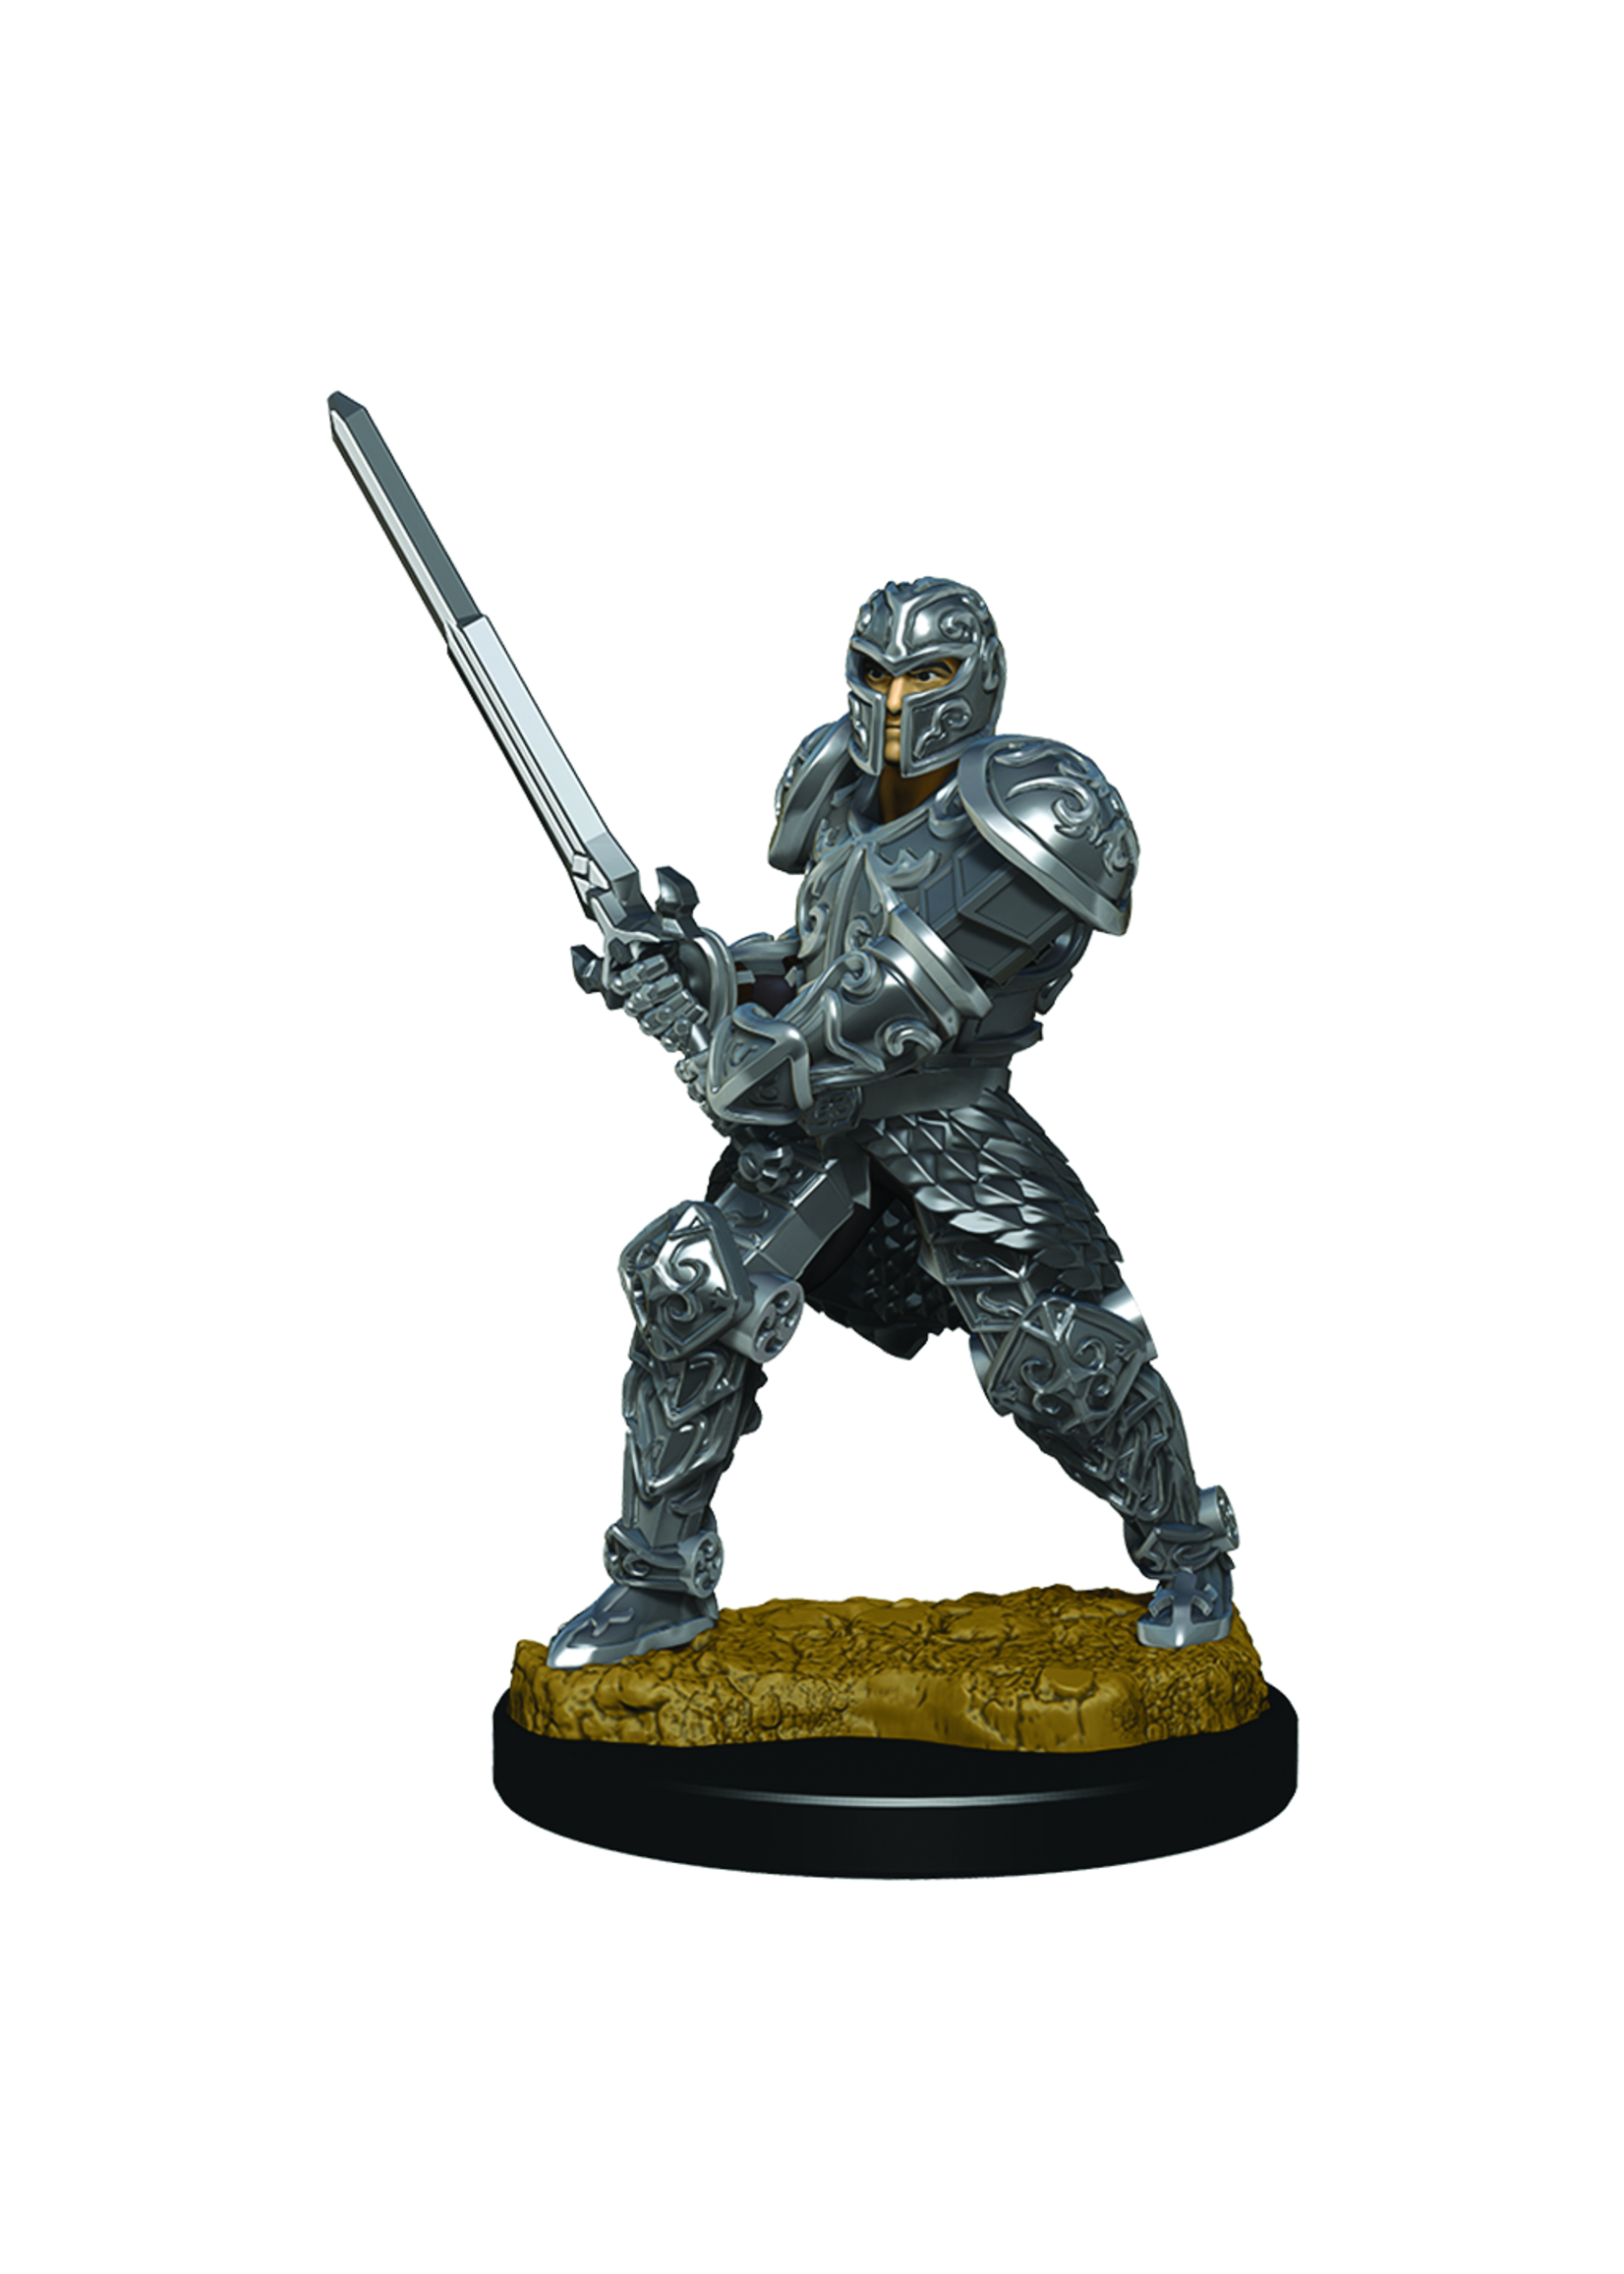 WizKids D&D Icons of the Realms Premium Figures: Male Human Fighter